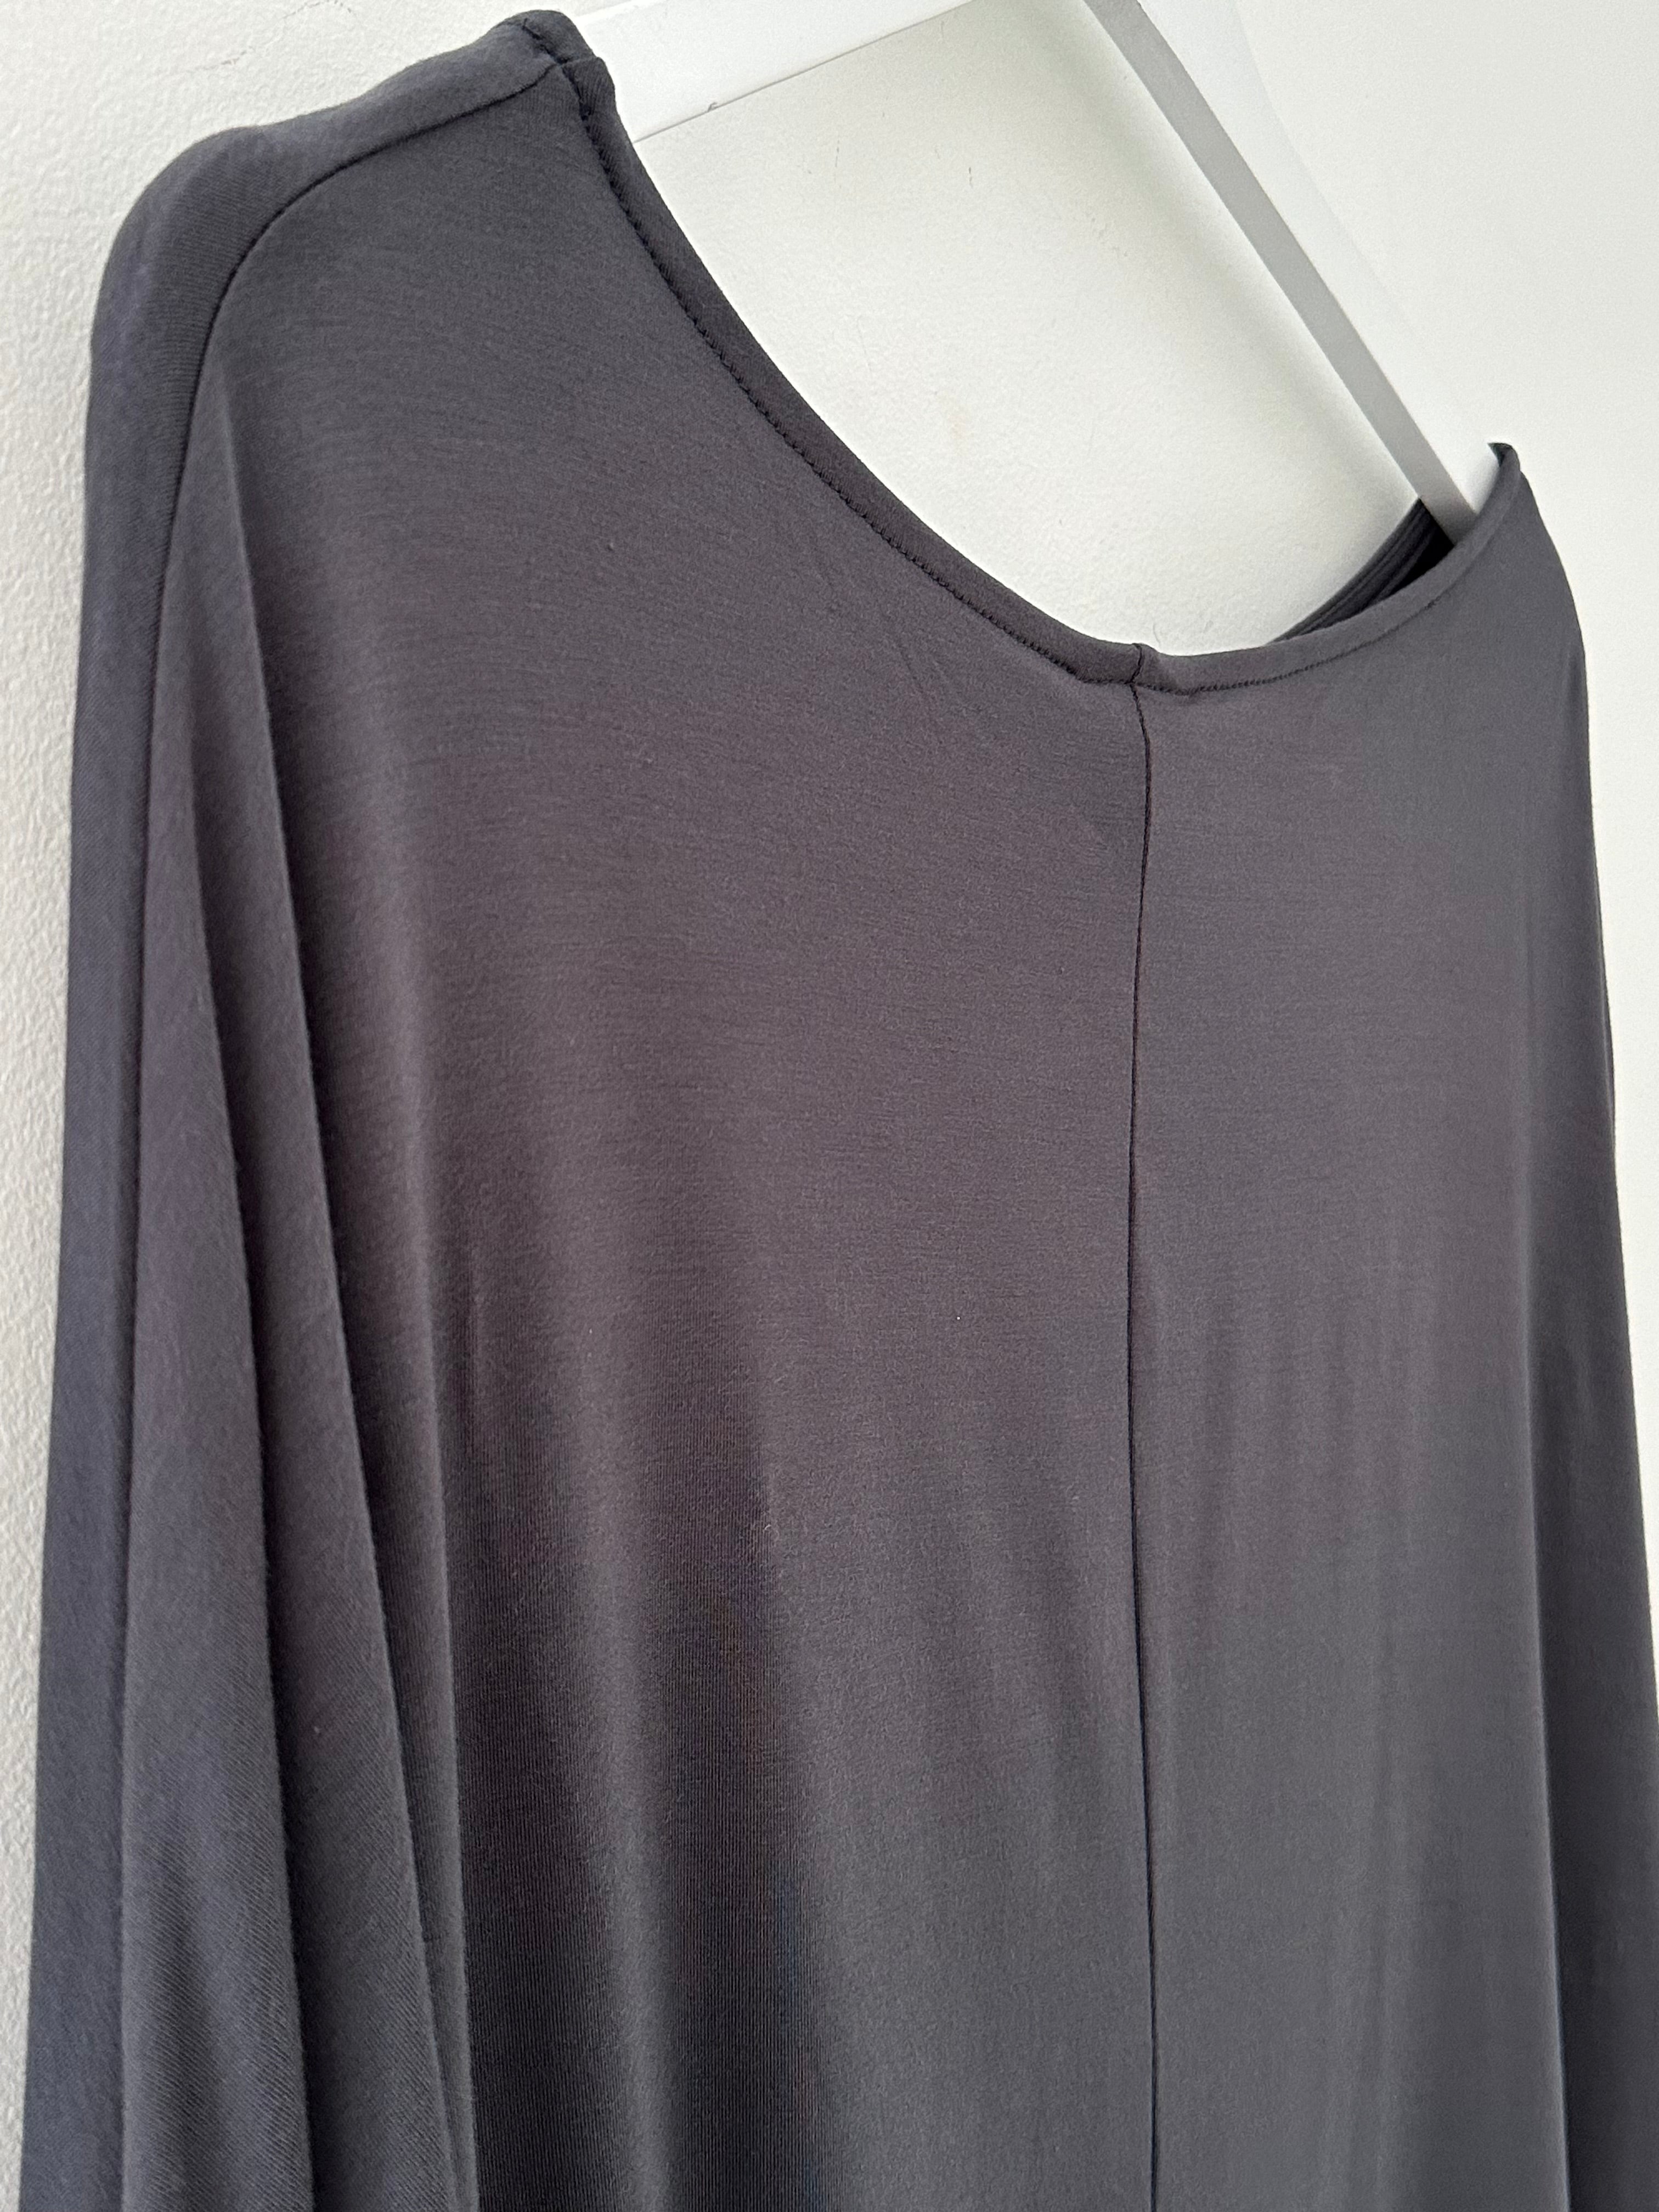 Bamboo Jersey Batwing Top in Slate